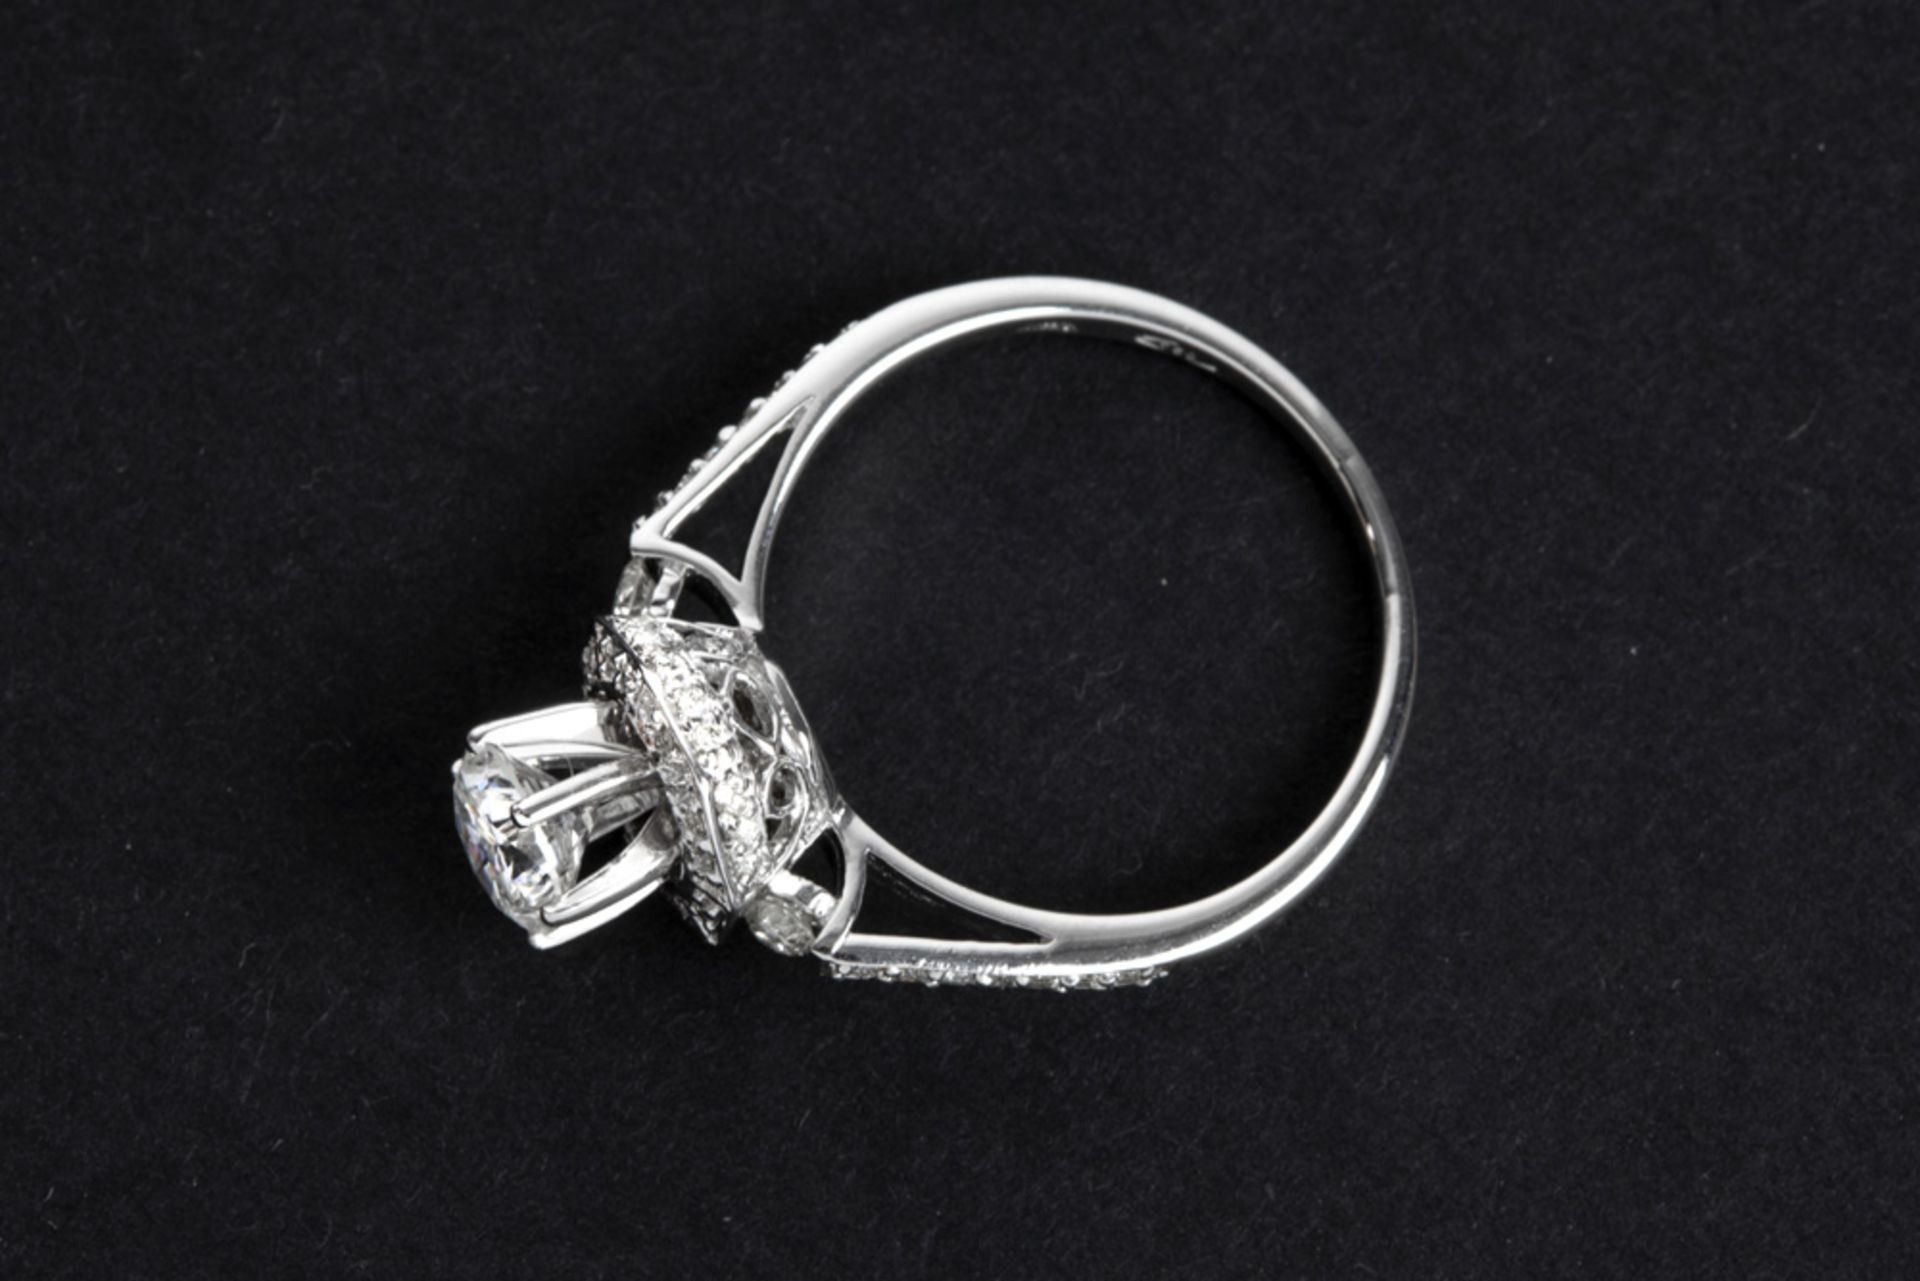 a 0,72 carat high quality brilliant cut diamond set in a ring in white gold (18 carat) with ca 0, - Image 2 of 2